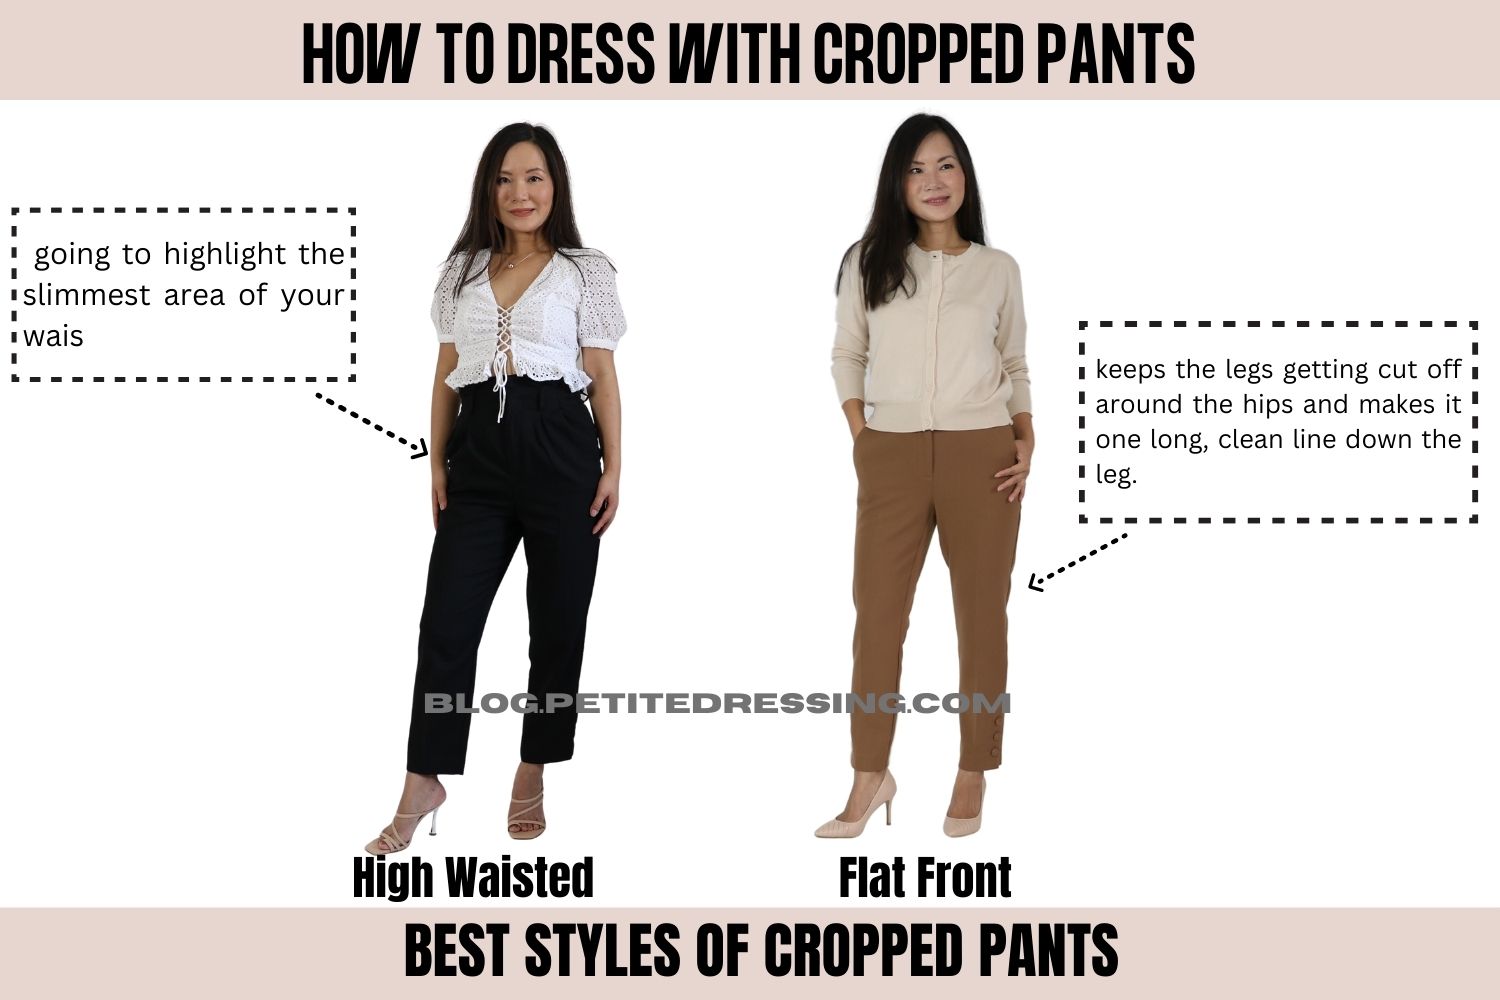 How to wear capris or cropped pants - your complete guide